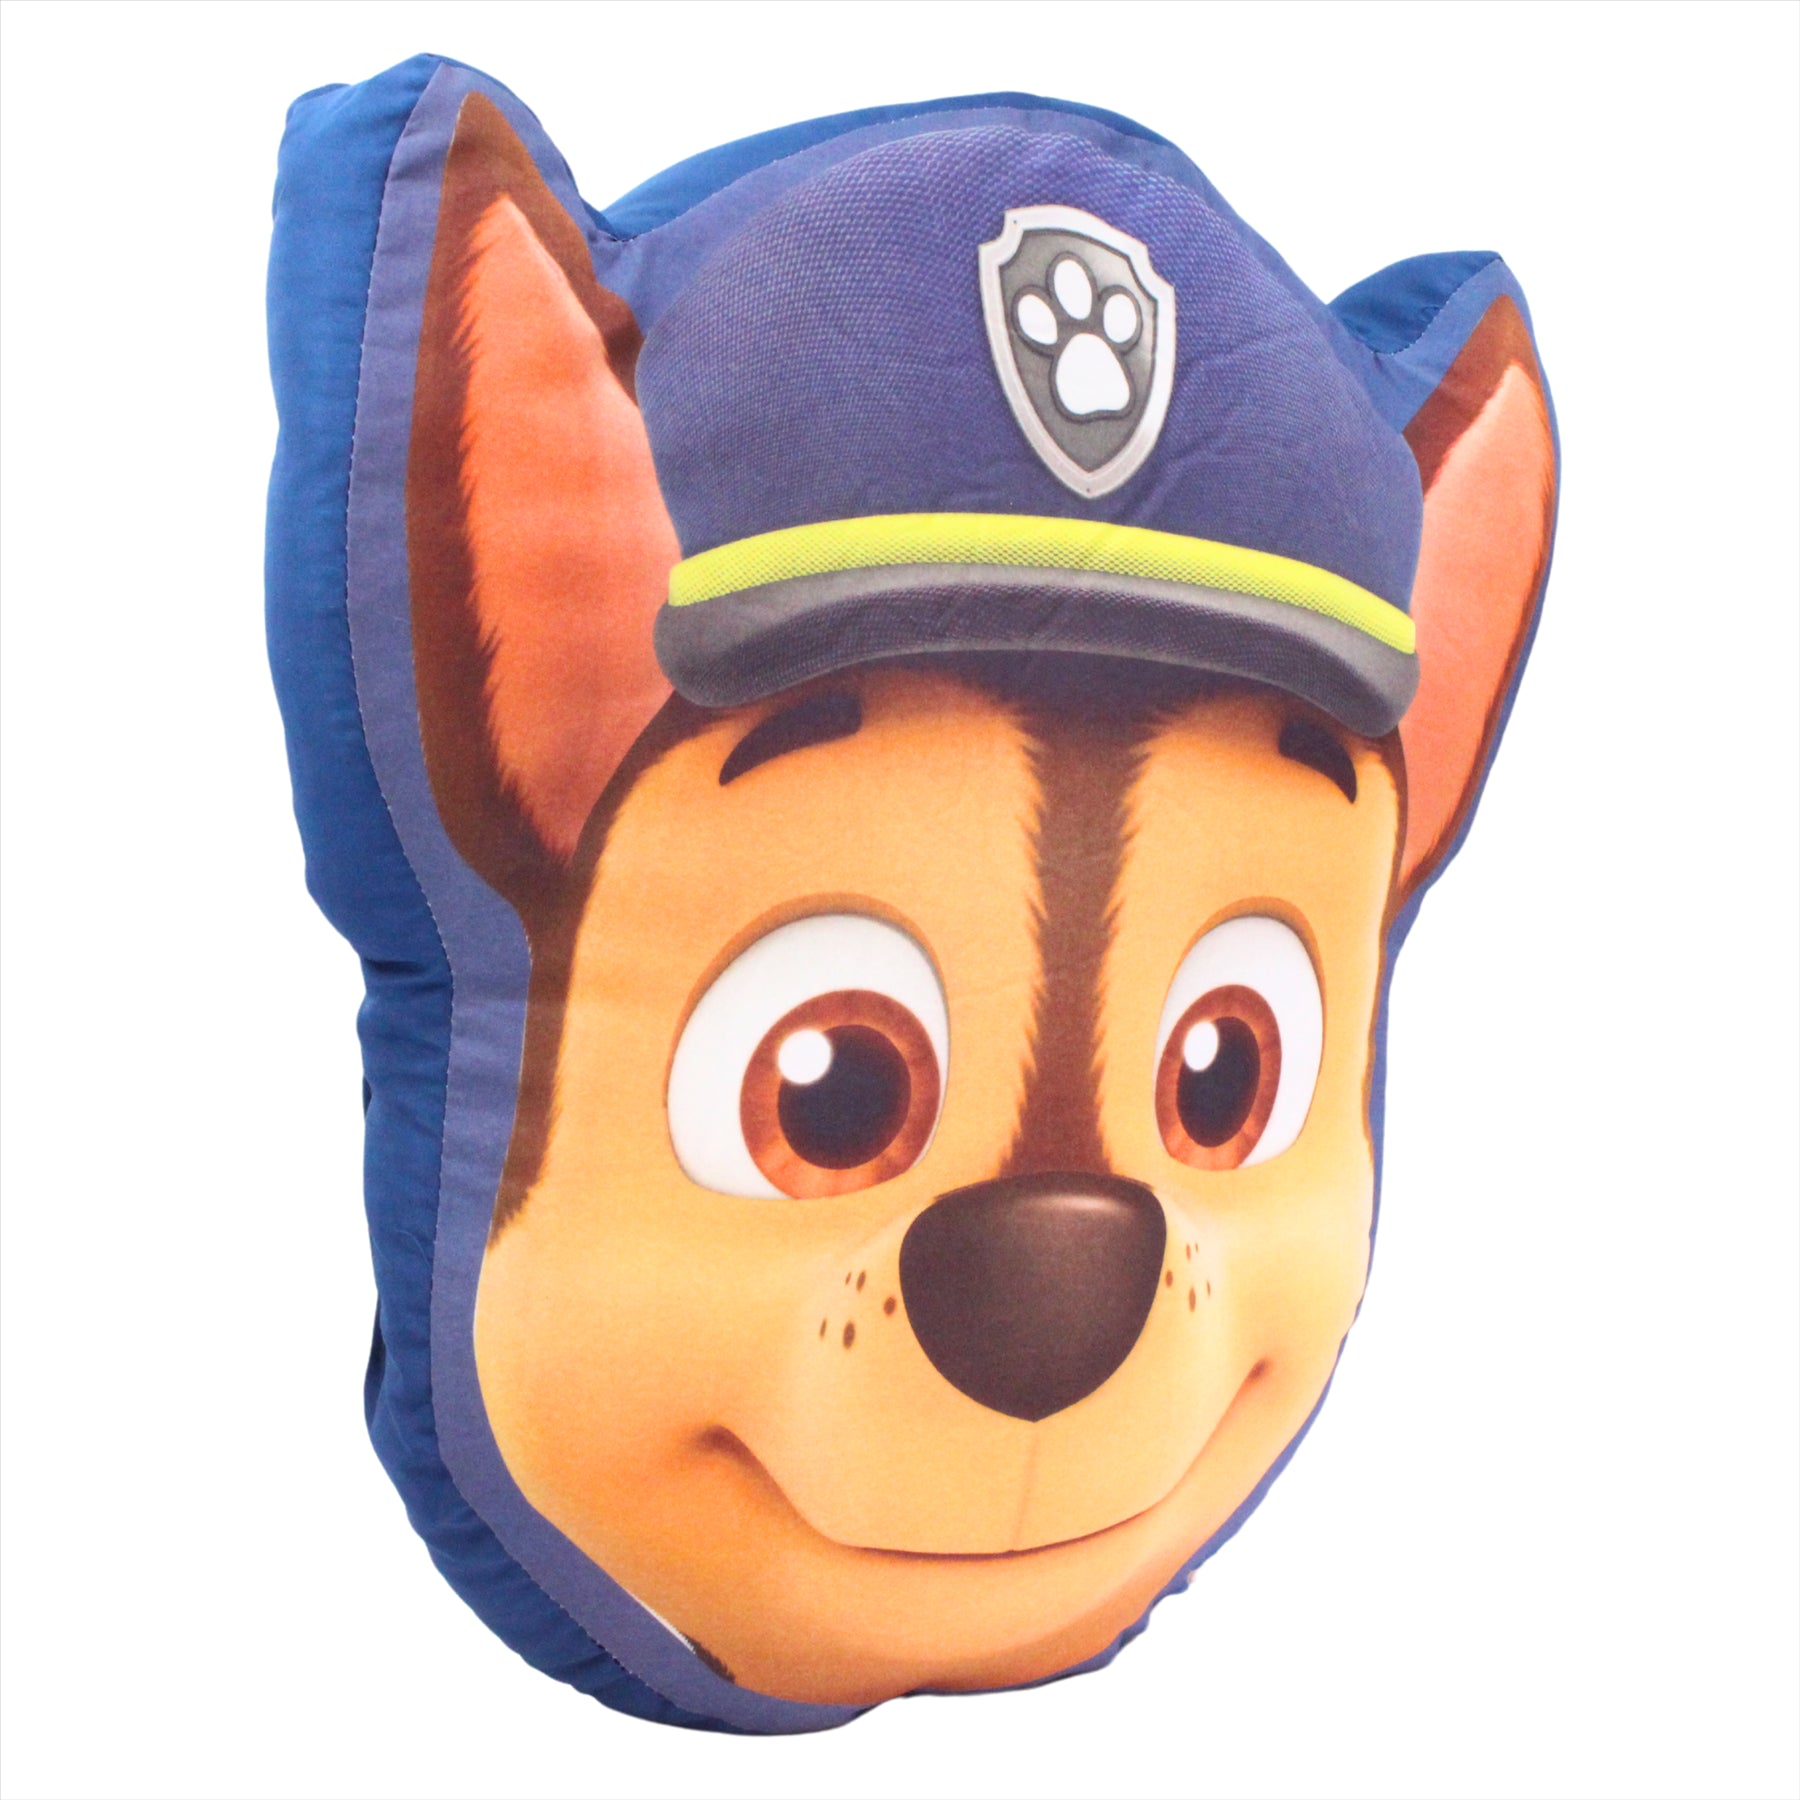 Paw Patrol Chase Head Shaped Super Soft Deluxe Pillow Cushion 40cm - Toptoys2u